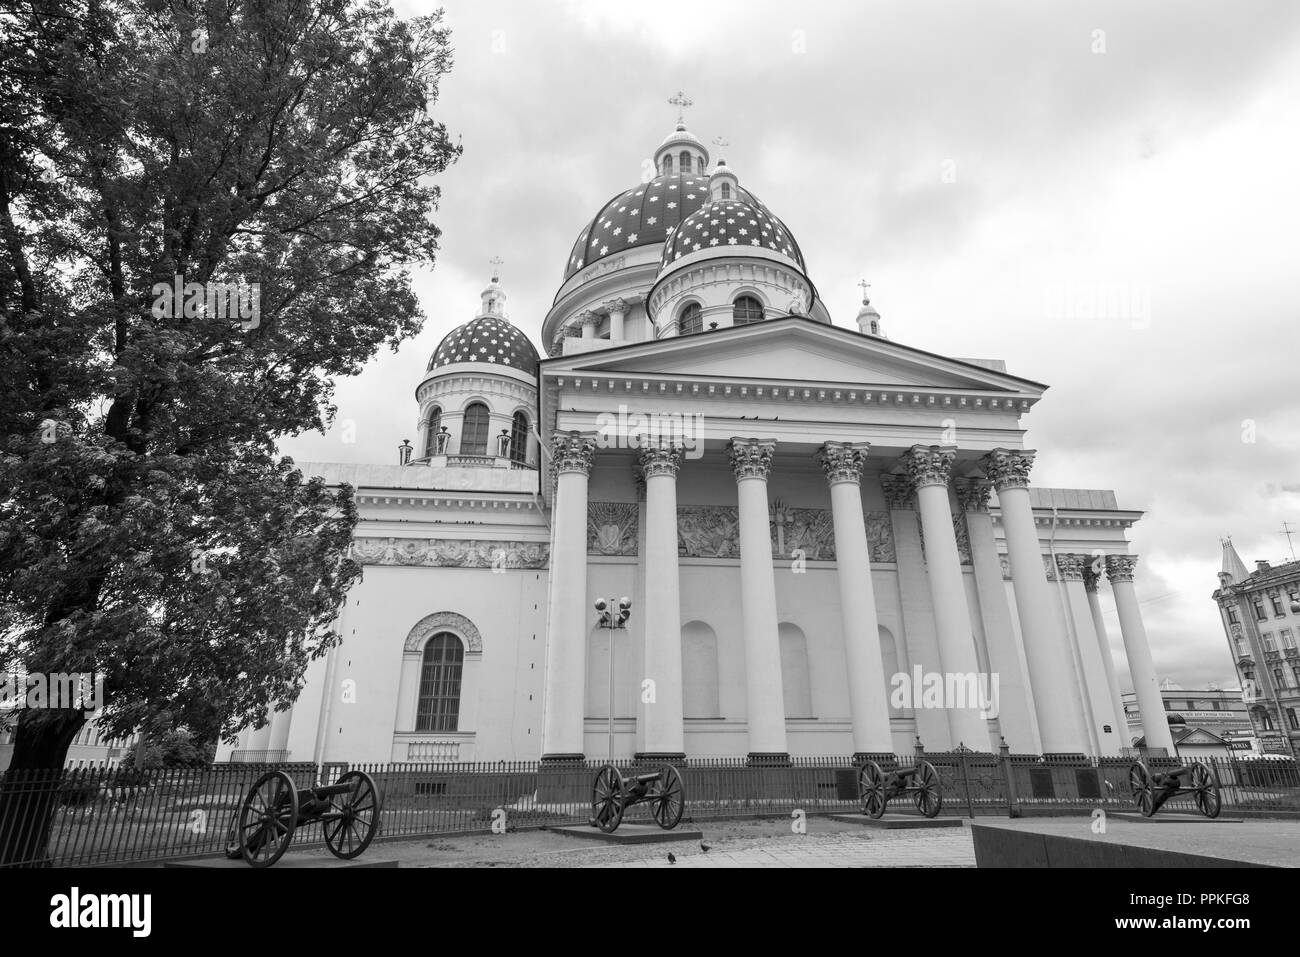 ST PETERSBURG, RUSSIA - 04 JUNE, 2018: Black and white picture of huge Trinity Cathedral the located in St Petersburg, Russia Stock Photo